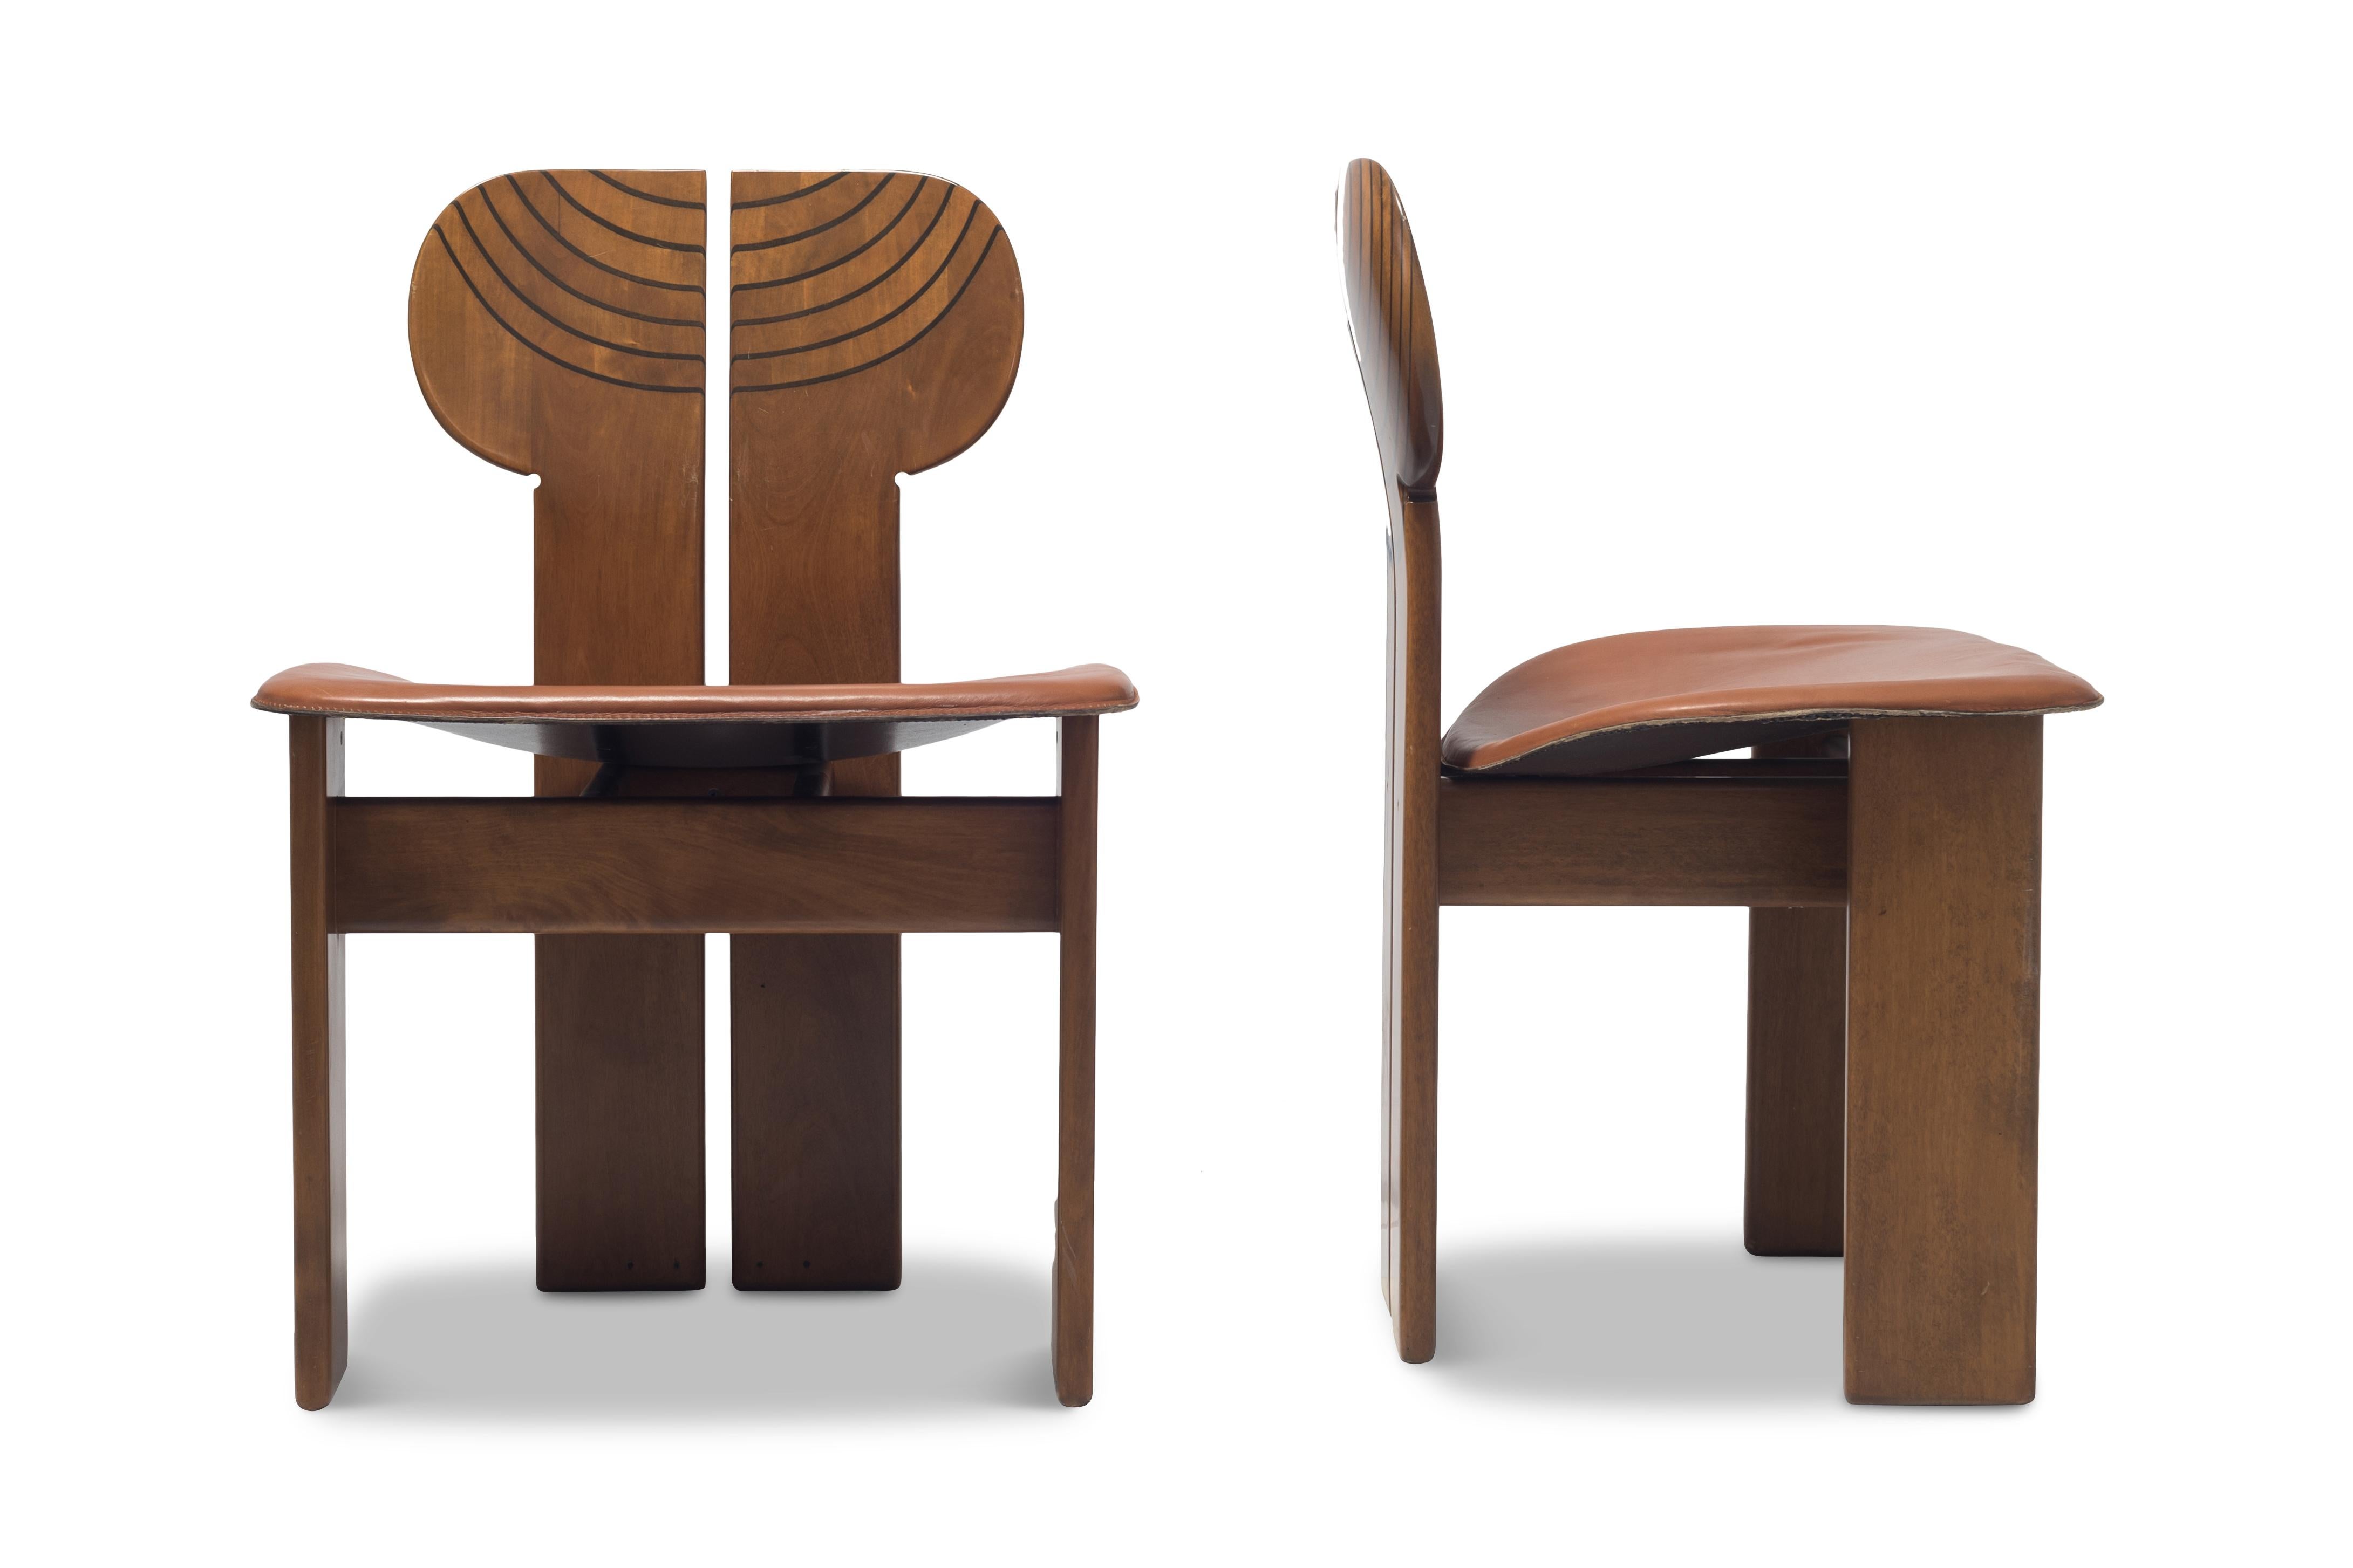 Africa chairs by Afra & Tobia Scarpa for Maxalto, Italy, 1975. 
Set of four
The sculptural chairs show many beautiful details, such as the ebonized layers in the backrest, the elegant curve in the cognac leather seat, or the brass support in the